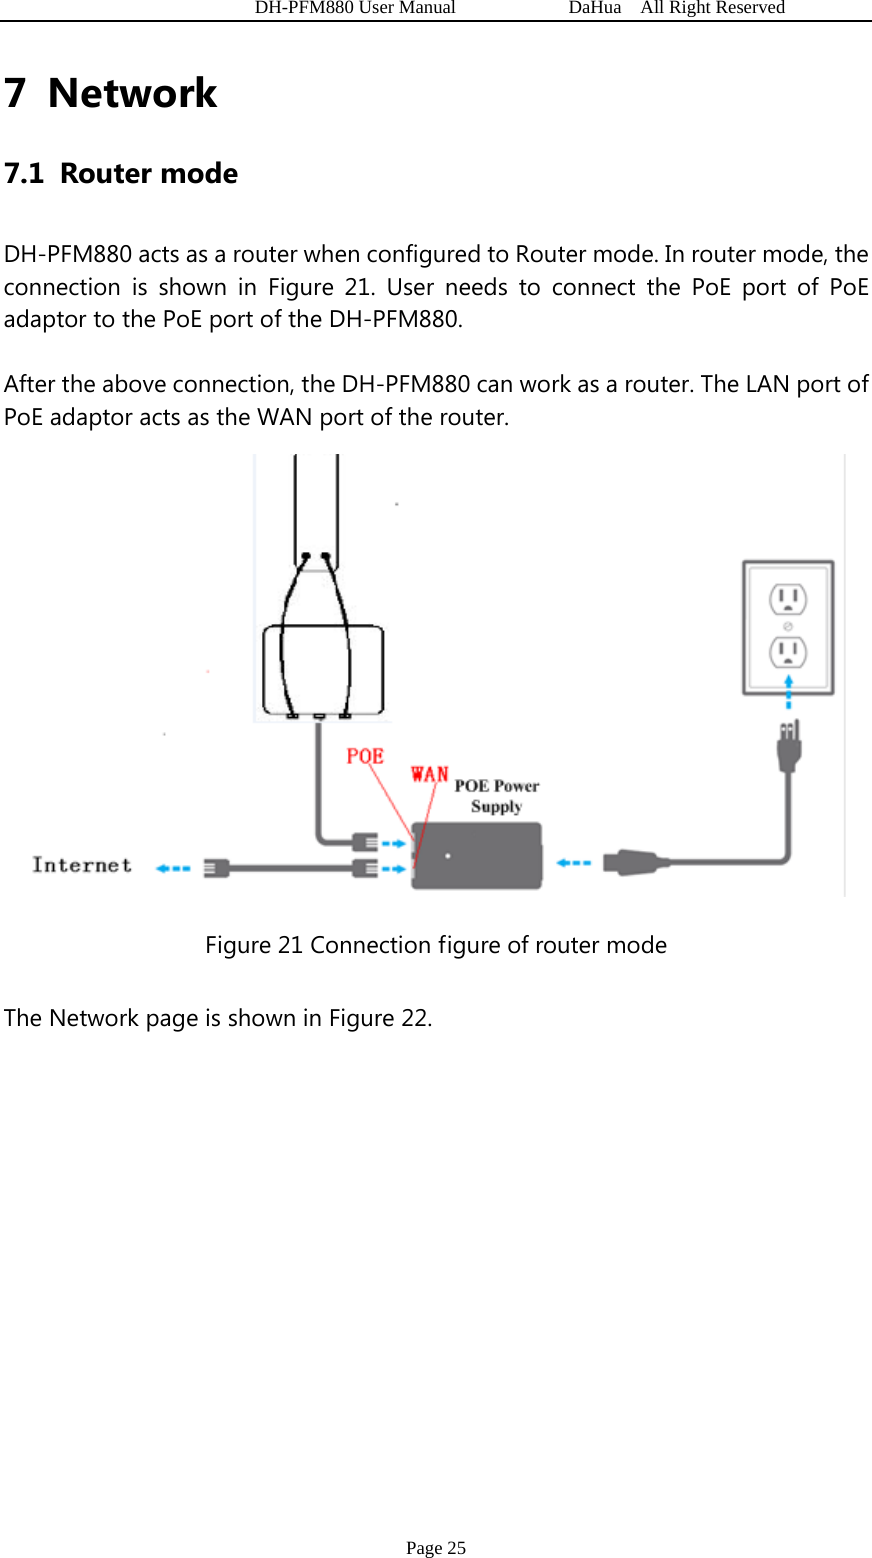   DH-PFM880 User Manual            DaHua  All Right Reserved Page 25 7 Network 7.1 Router mode DH-PFM880 acts as a router when configured to Router mode. In router mode, the connection is shown in Figure 21. User needs to connect the PoE port of PoE adaptor to the PoE port of the DH-PFM880.   After the above connection, the DH-PFM880 can work as a router. The LAN port of PoE adaptor acts as the WAN port of the router.  Figure 21 Connection figure of router mode The Network page is shown in Figure 22. 